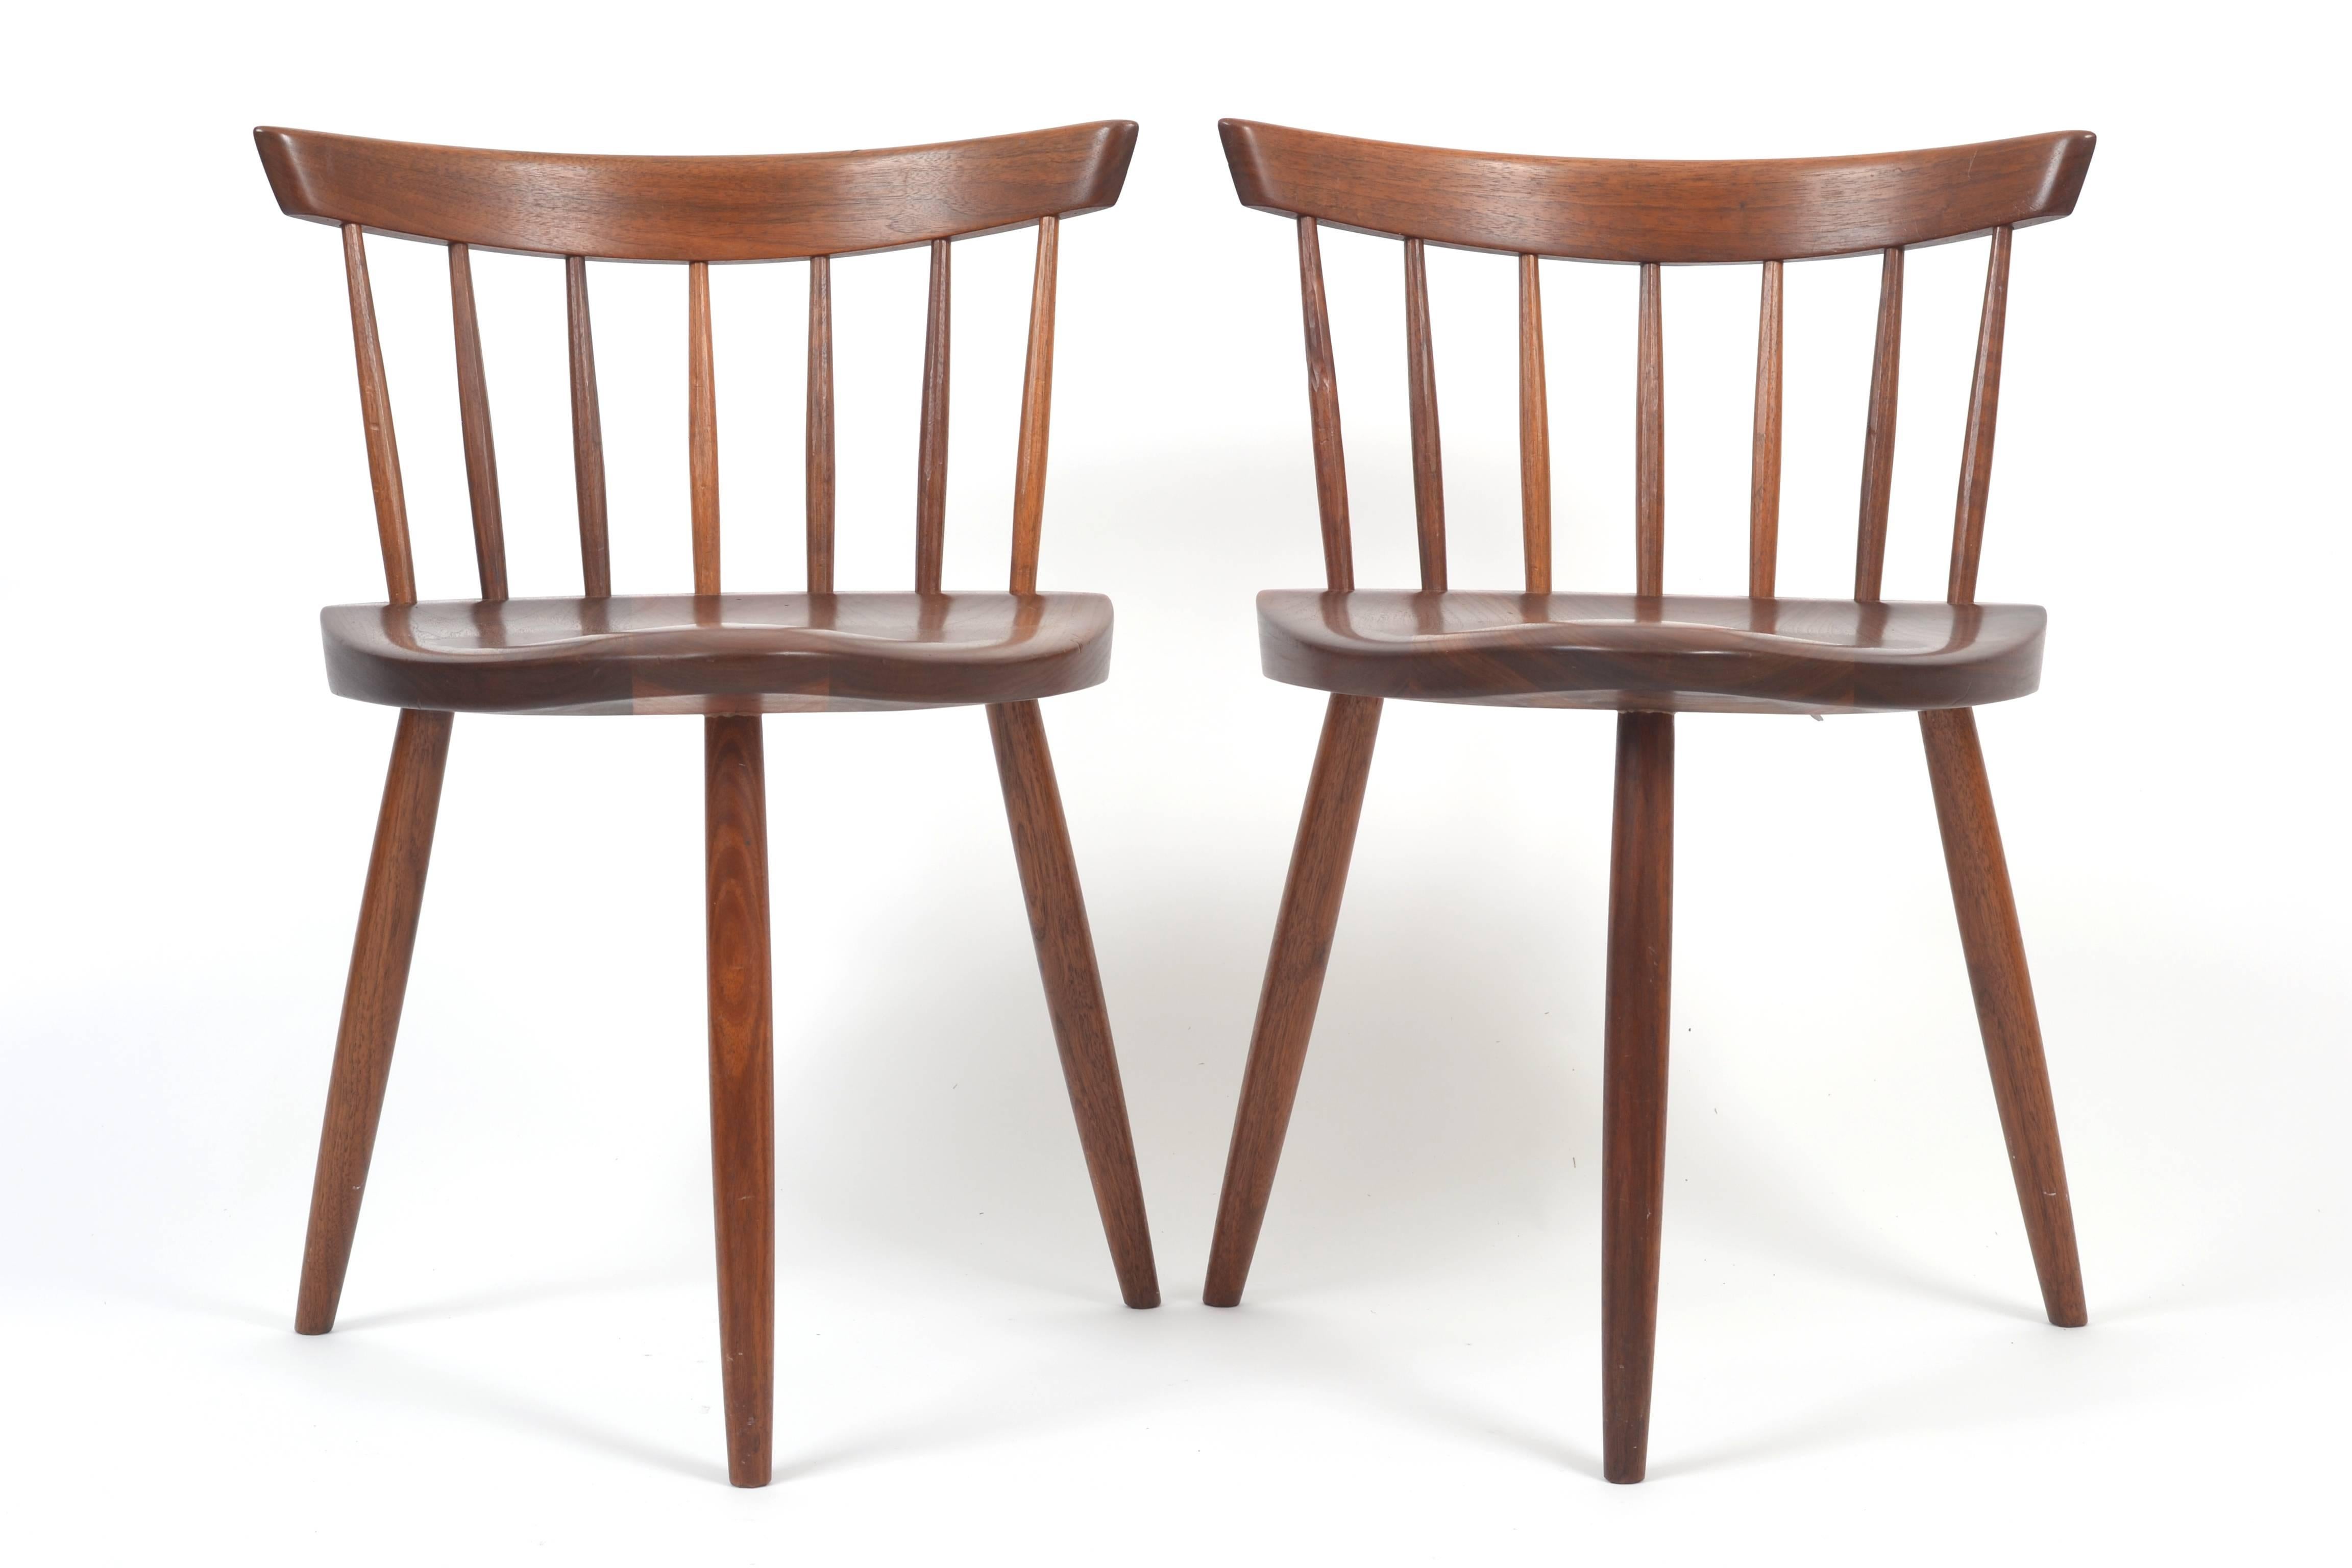 A gorgeous pair of 1967 George Nakashima "Mirra" chairs in walnut. The chairs have great provenance and previously belonged to two different prominent Texas architects.